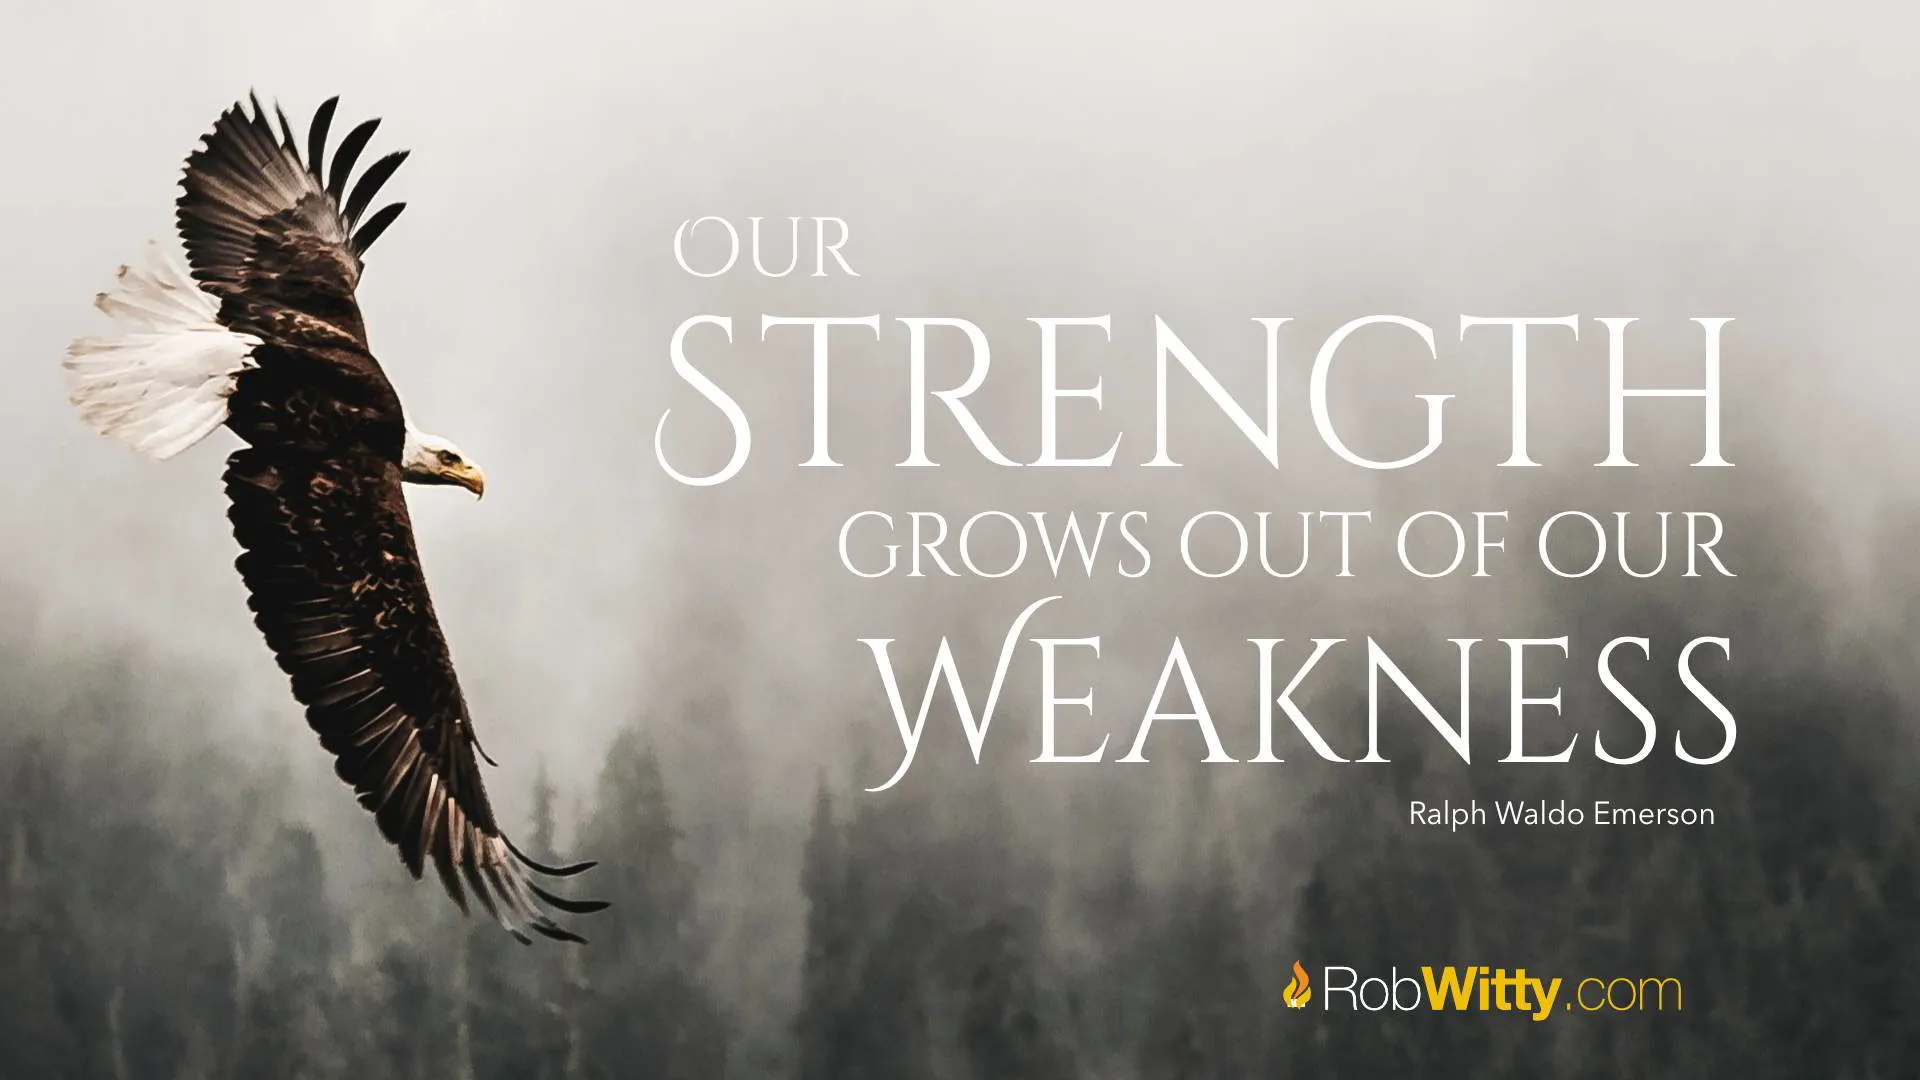 Strengths Start Out as Weaknesses